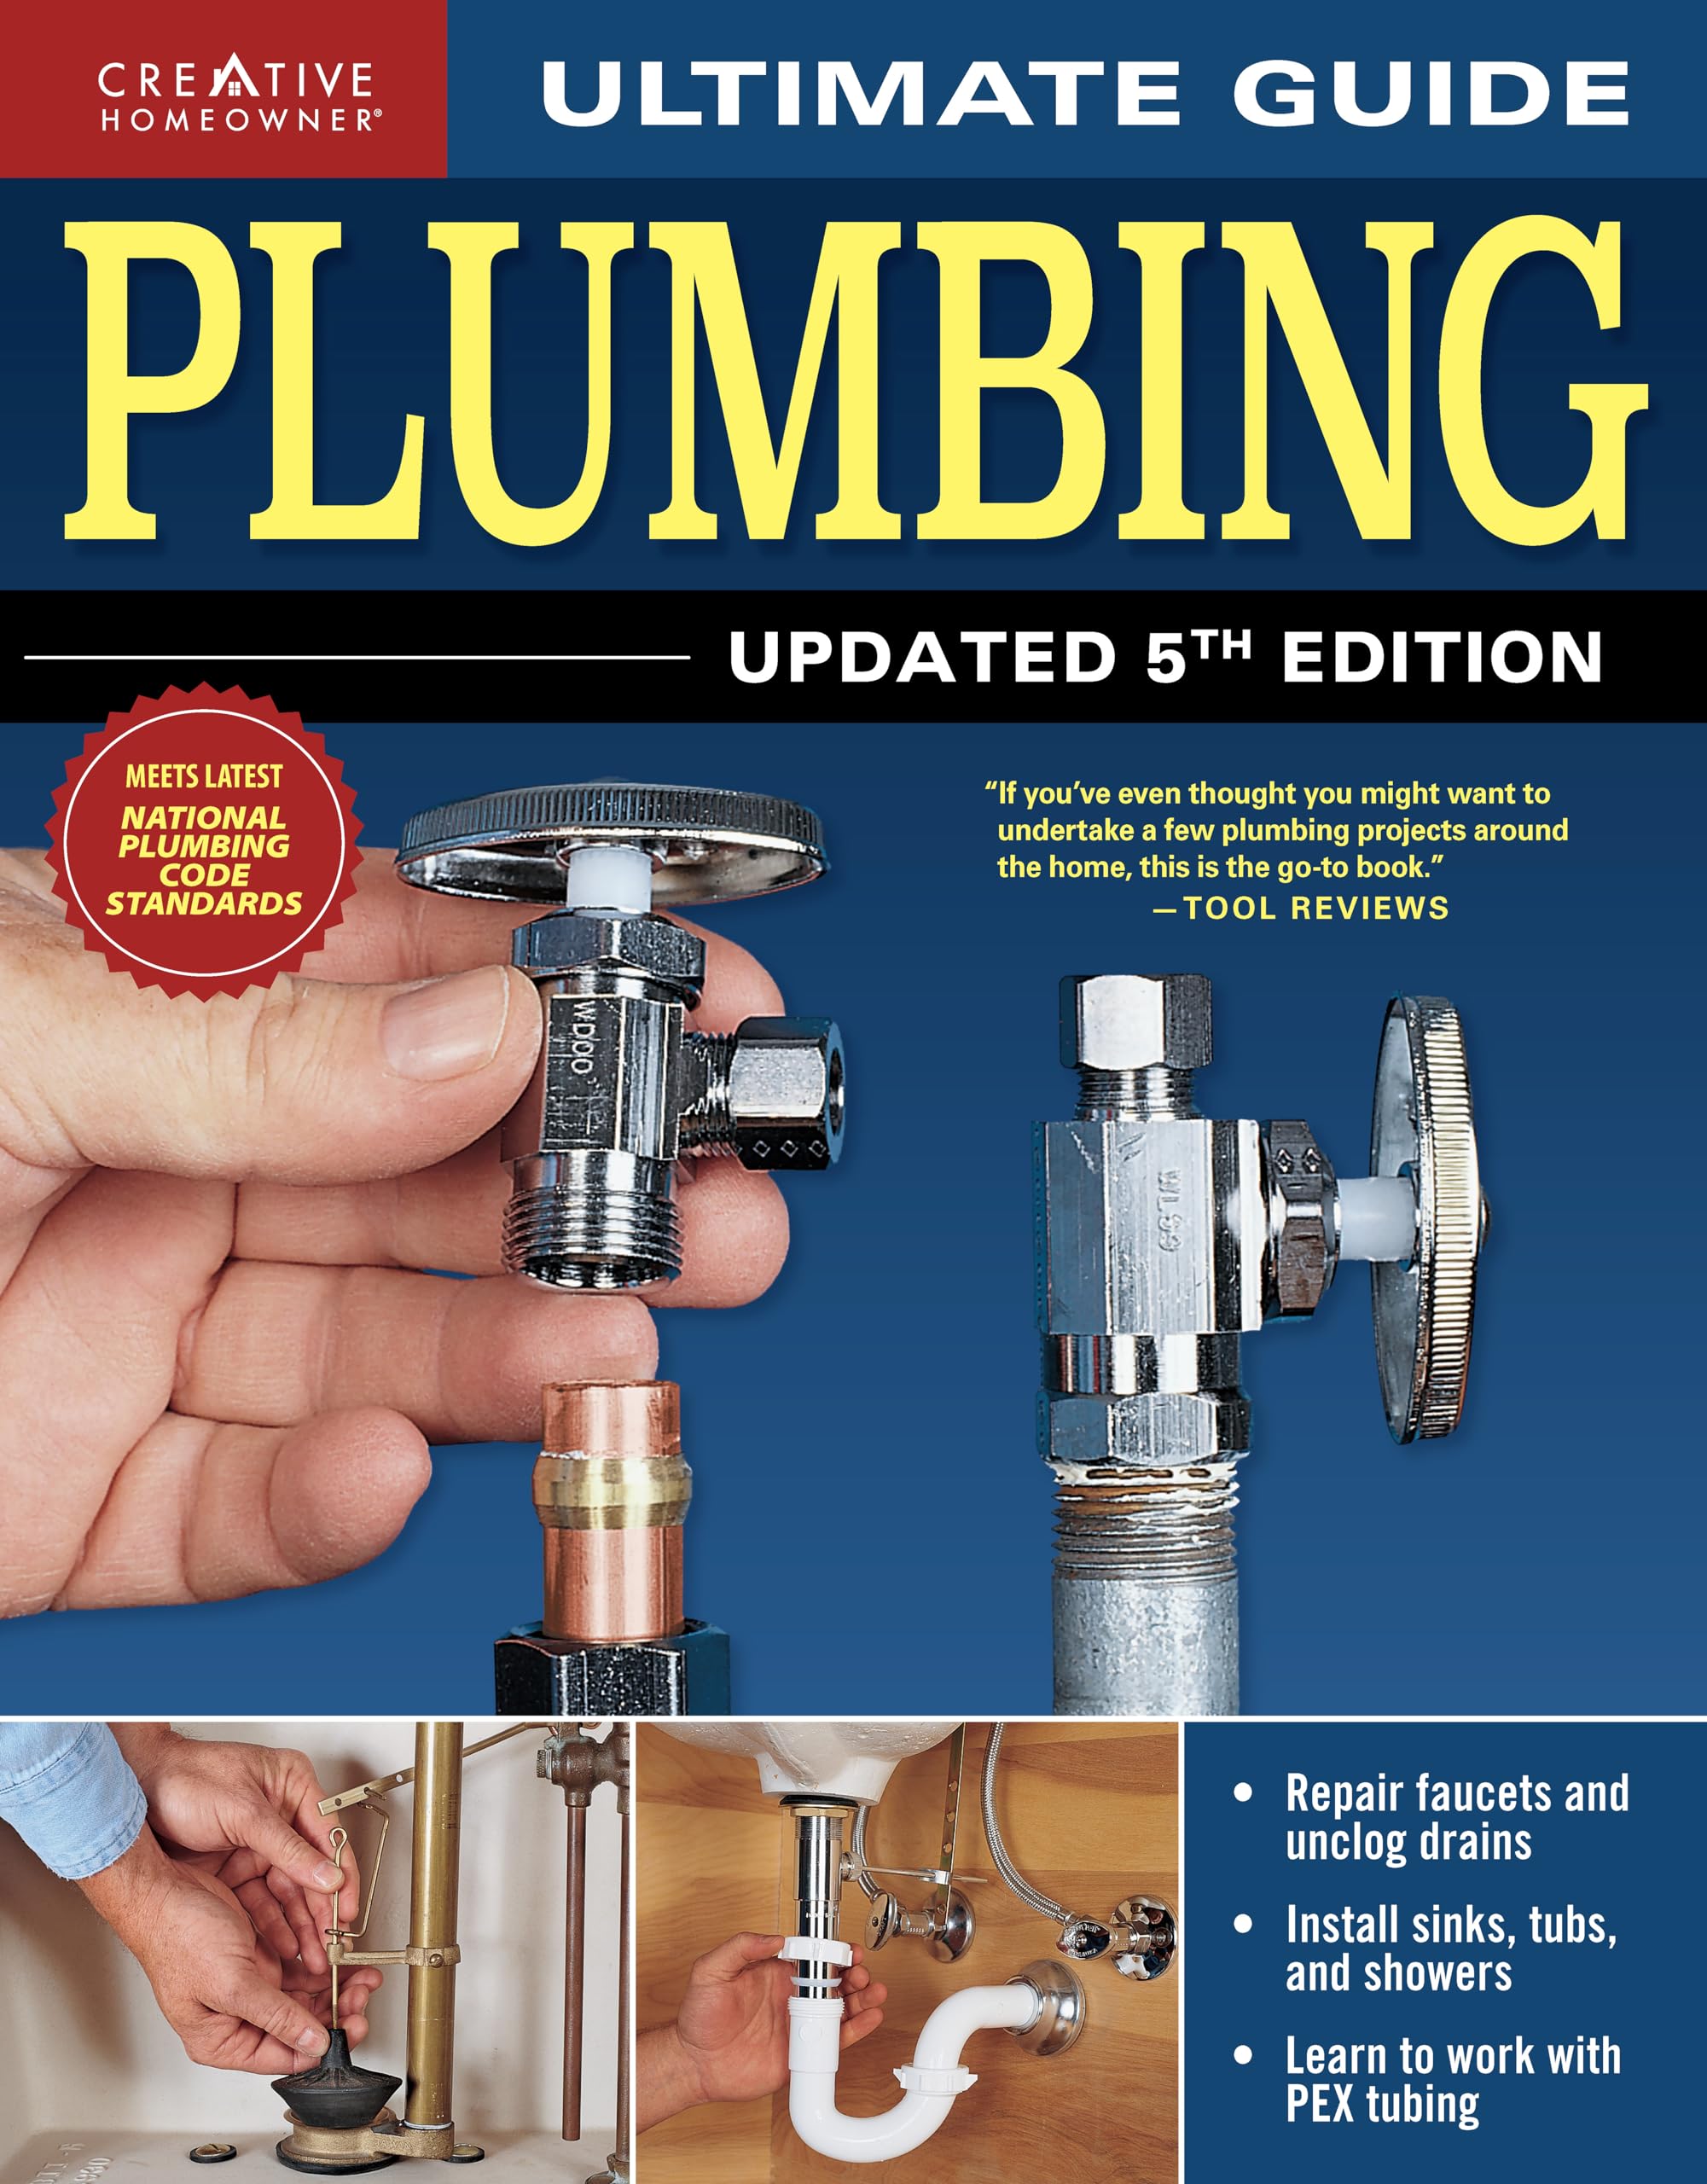 Ultimate Guide: Plumbing, Updated 5th Edition by Editors of Creative Homeowner